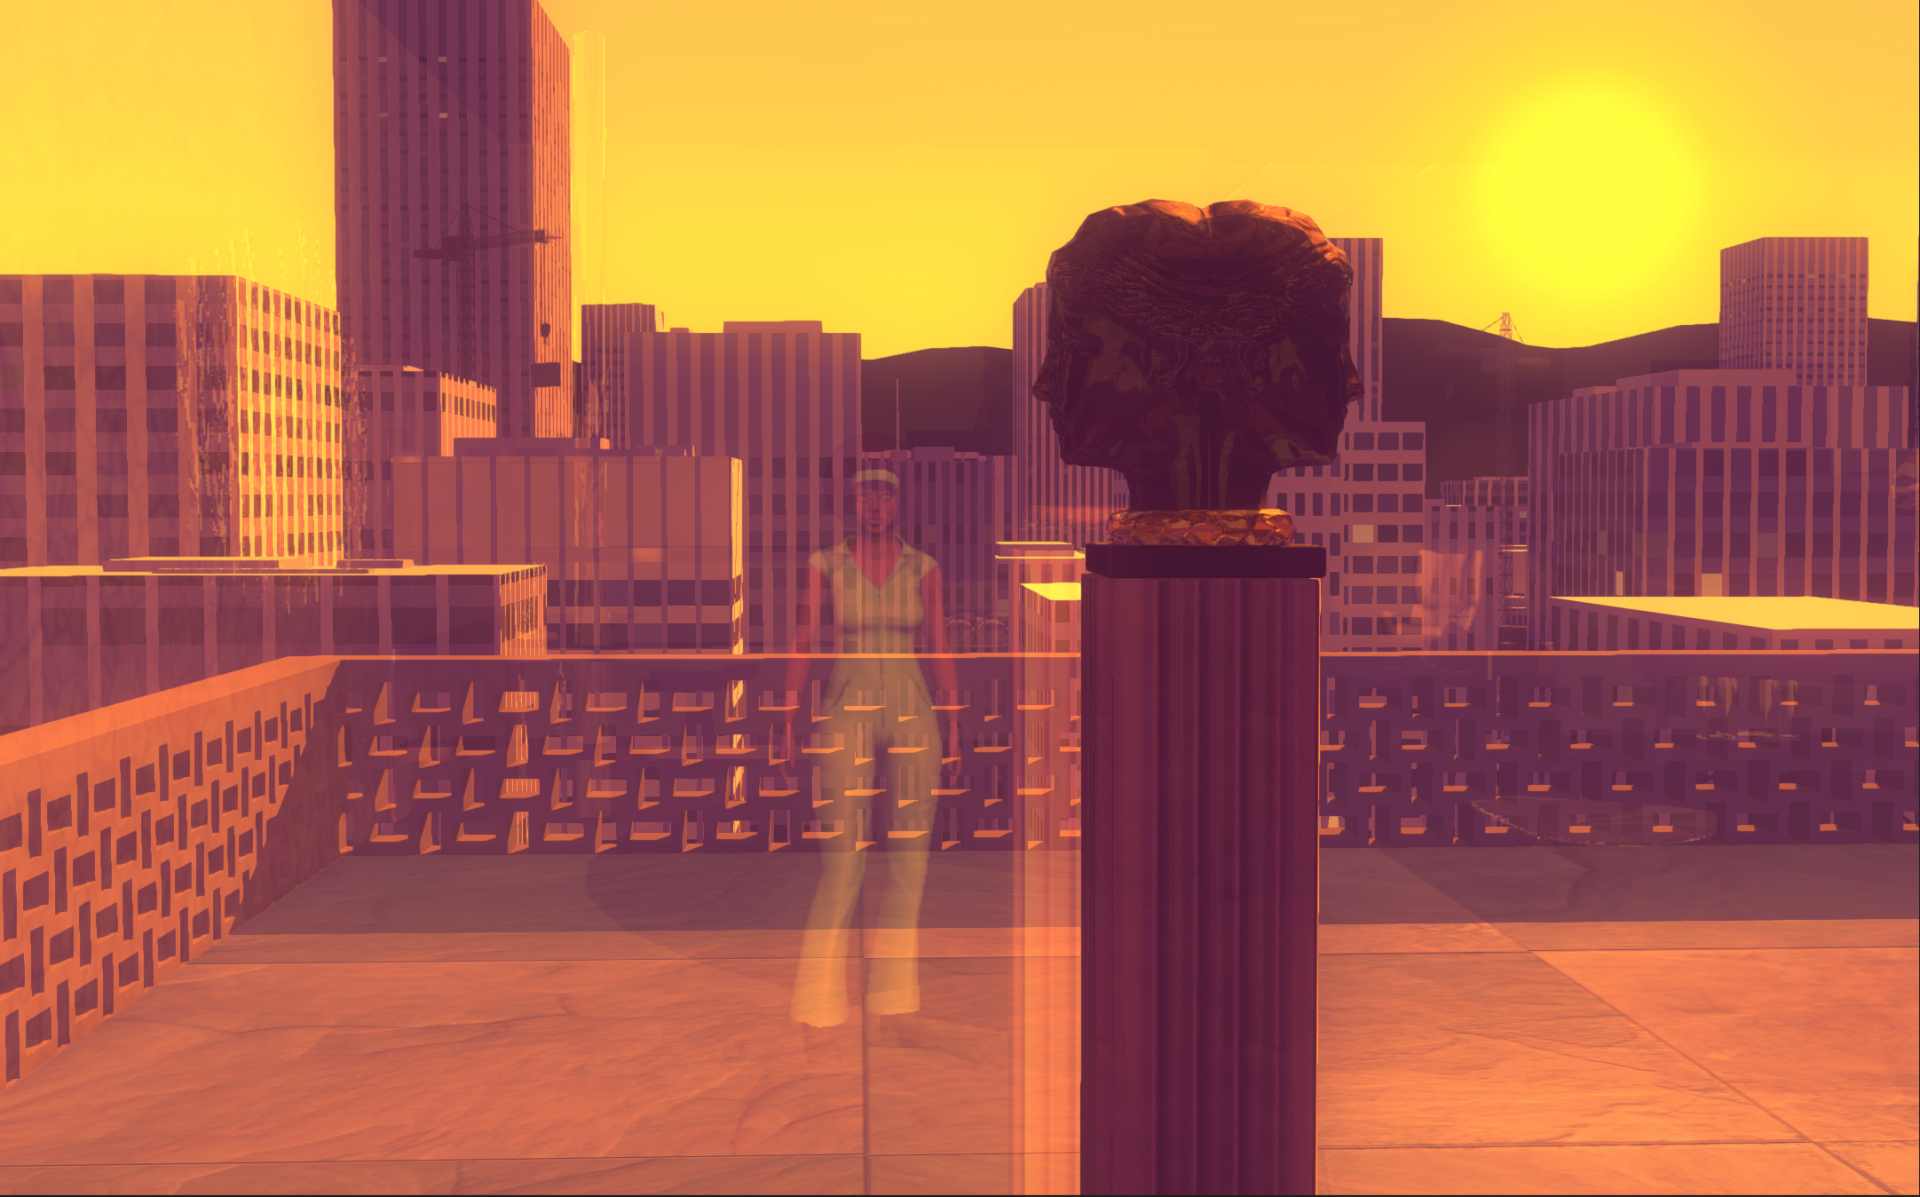 A still from a video game showing a view of a terrace of a city apartment at sunset. A woman's reflection is visible, suggesting she is standing inside and looking out the glass doors